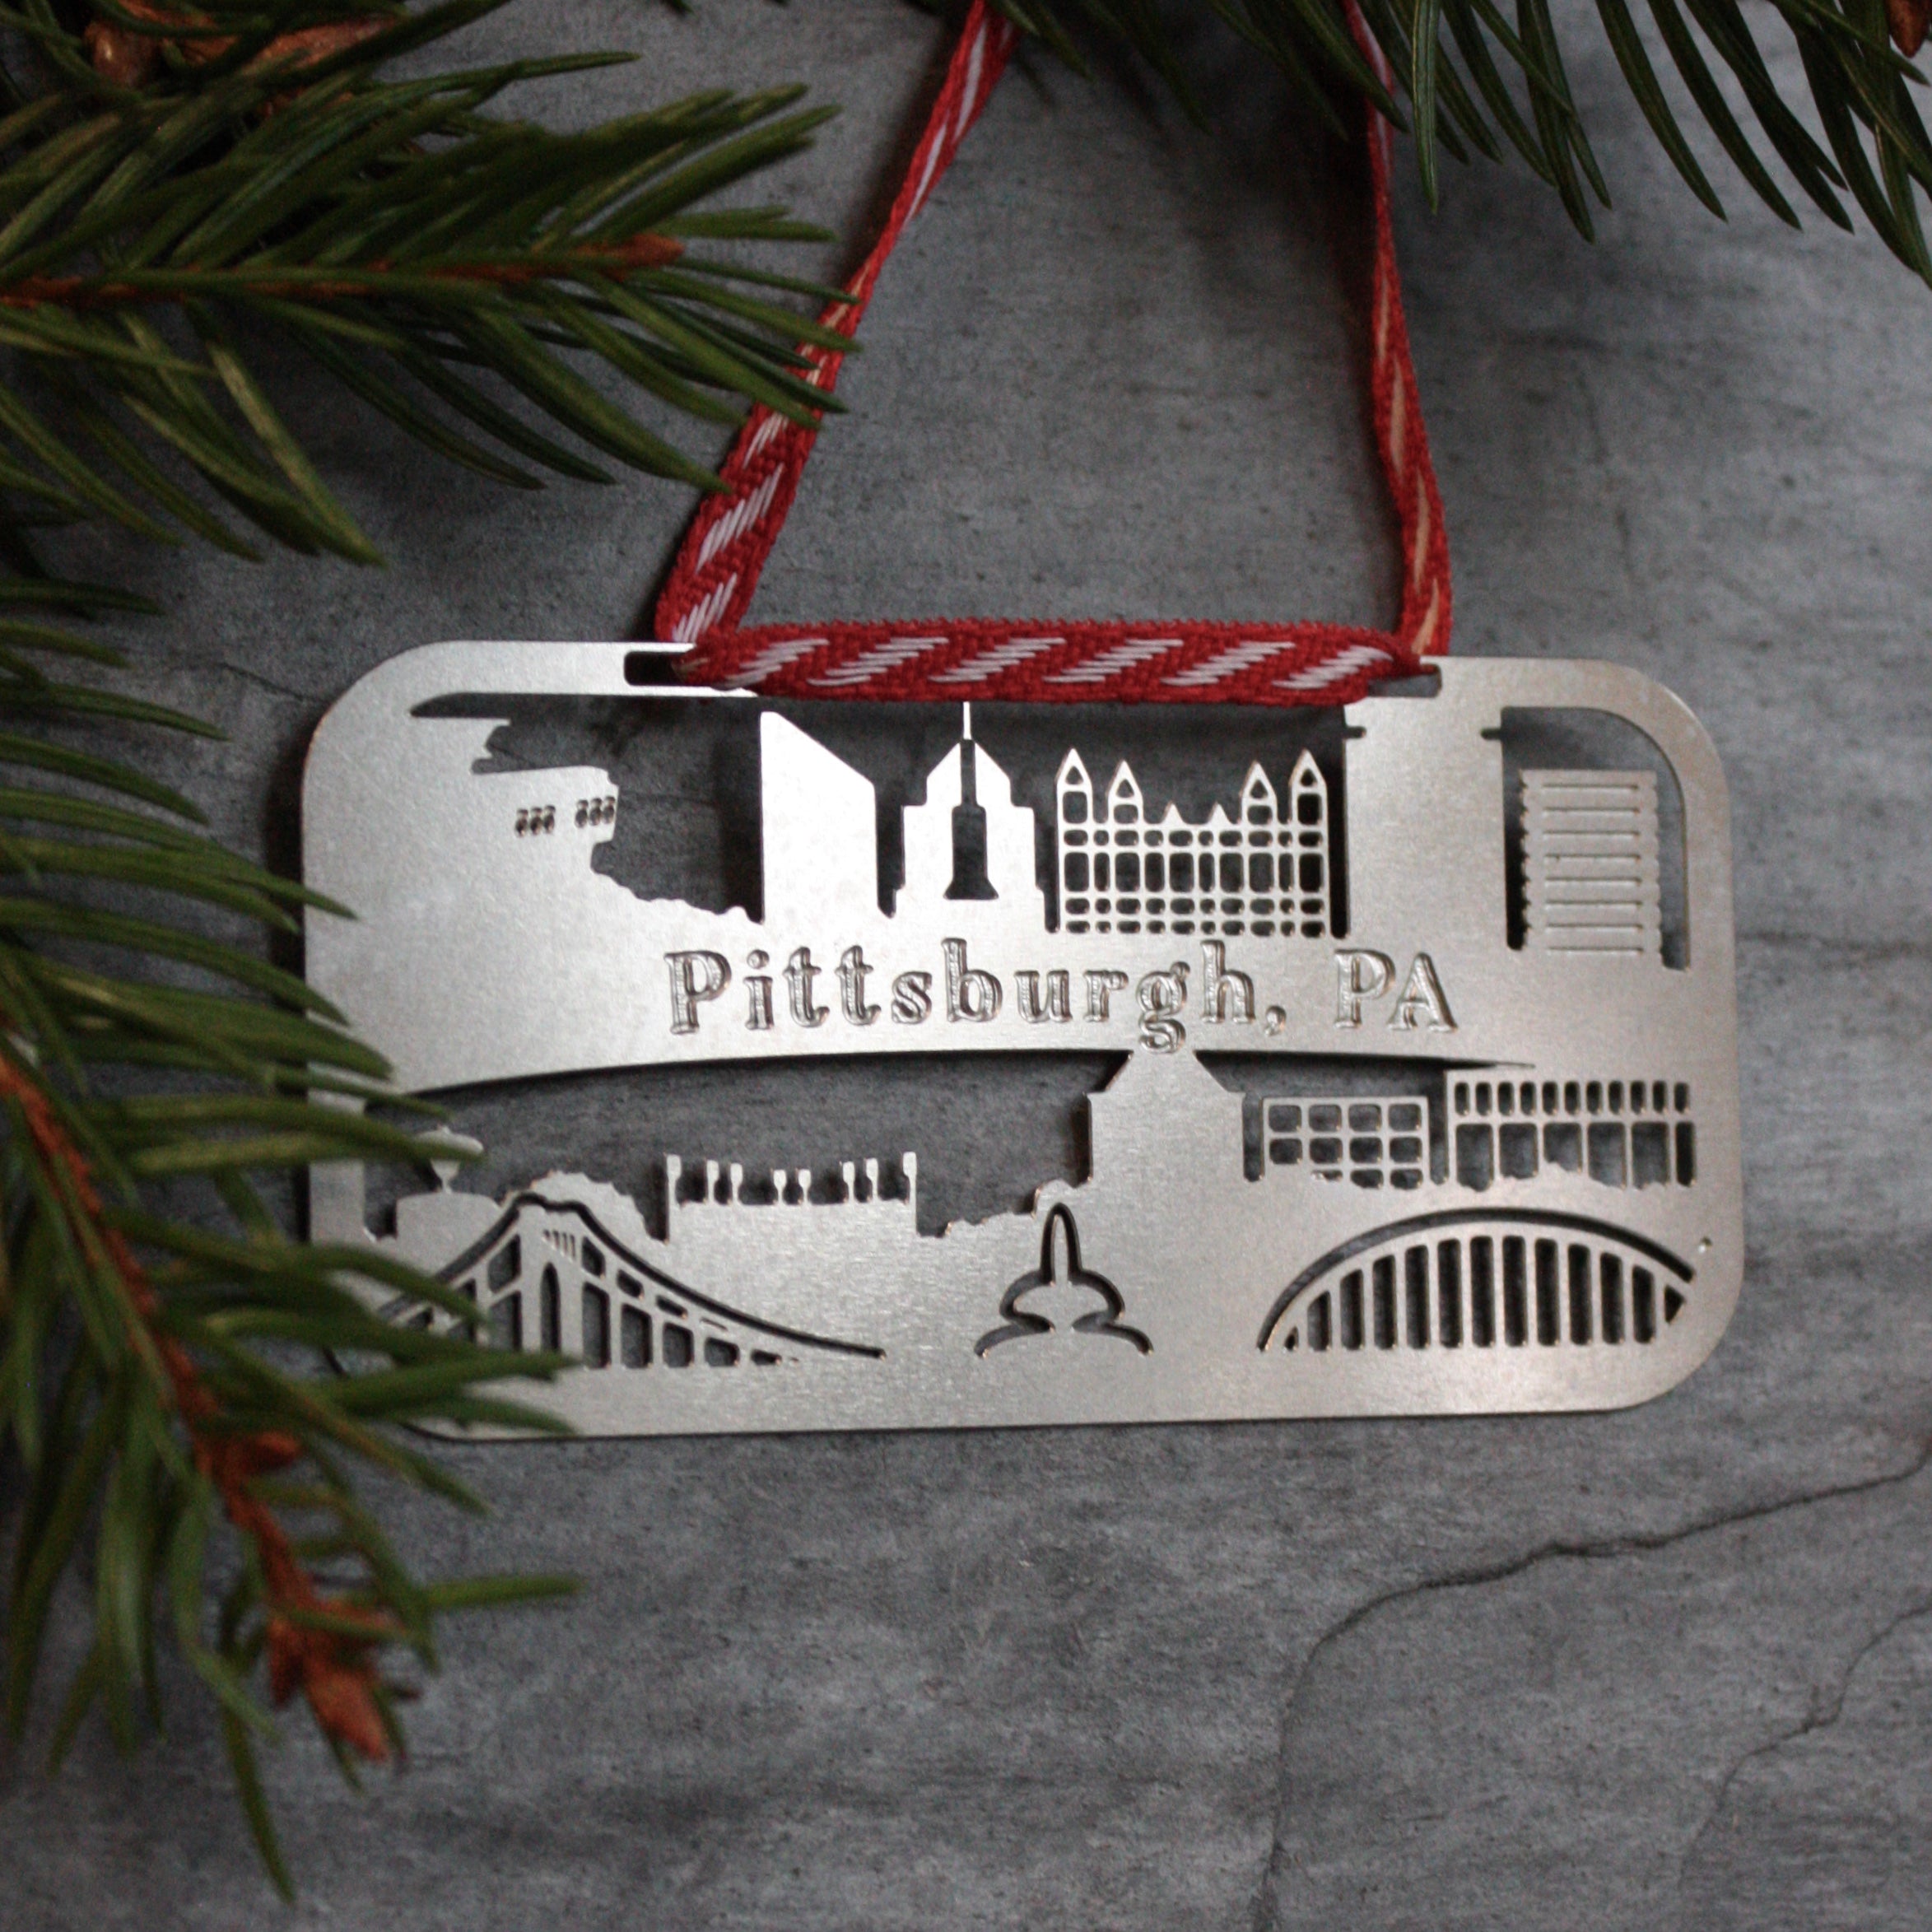 Pittsburgh Skyline Holiday Ornament & Gift Tag by local artist Audra Azoury